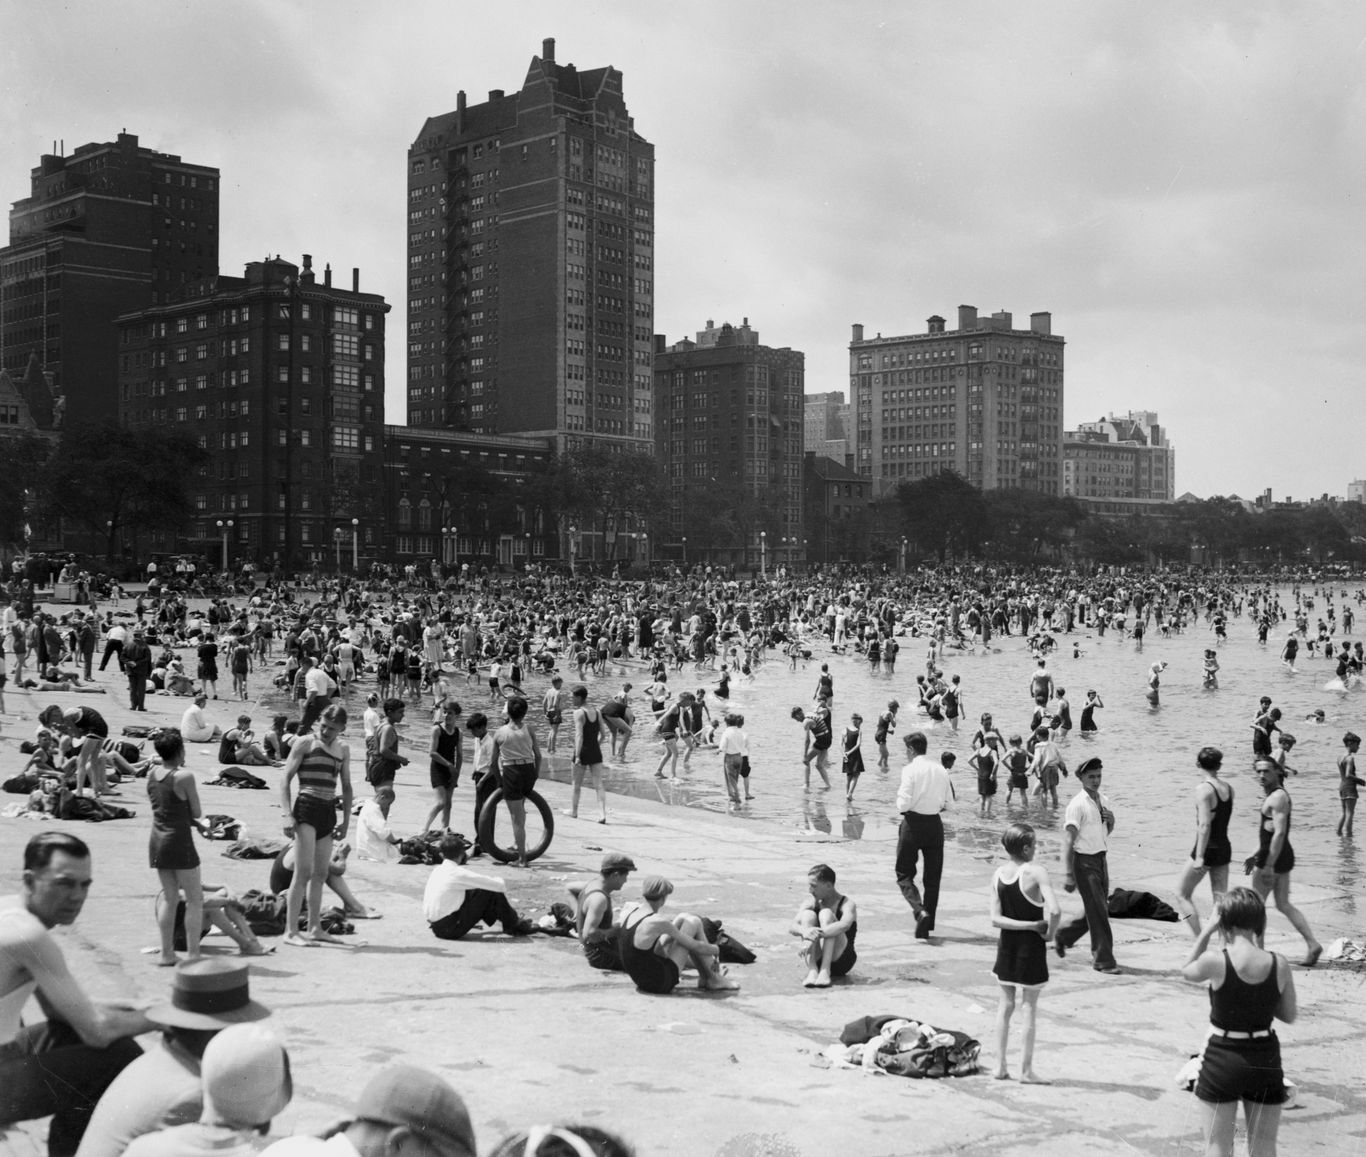 12th Street Beach, Chicago (2023) - Images, Timings